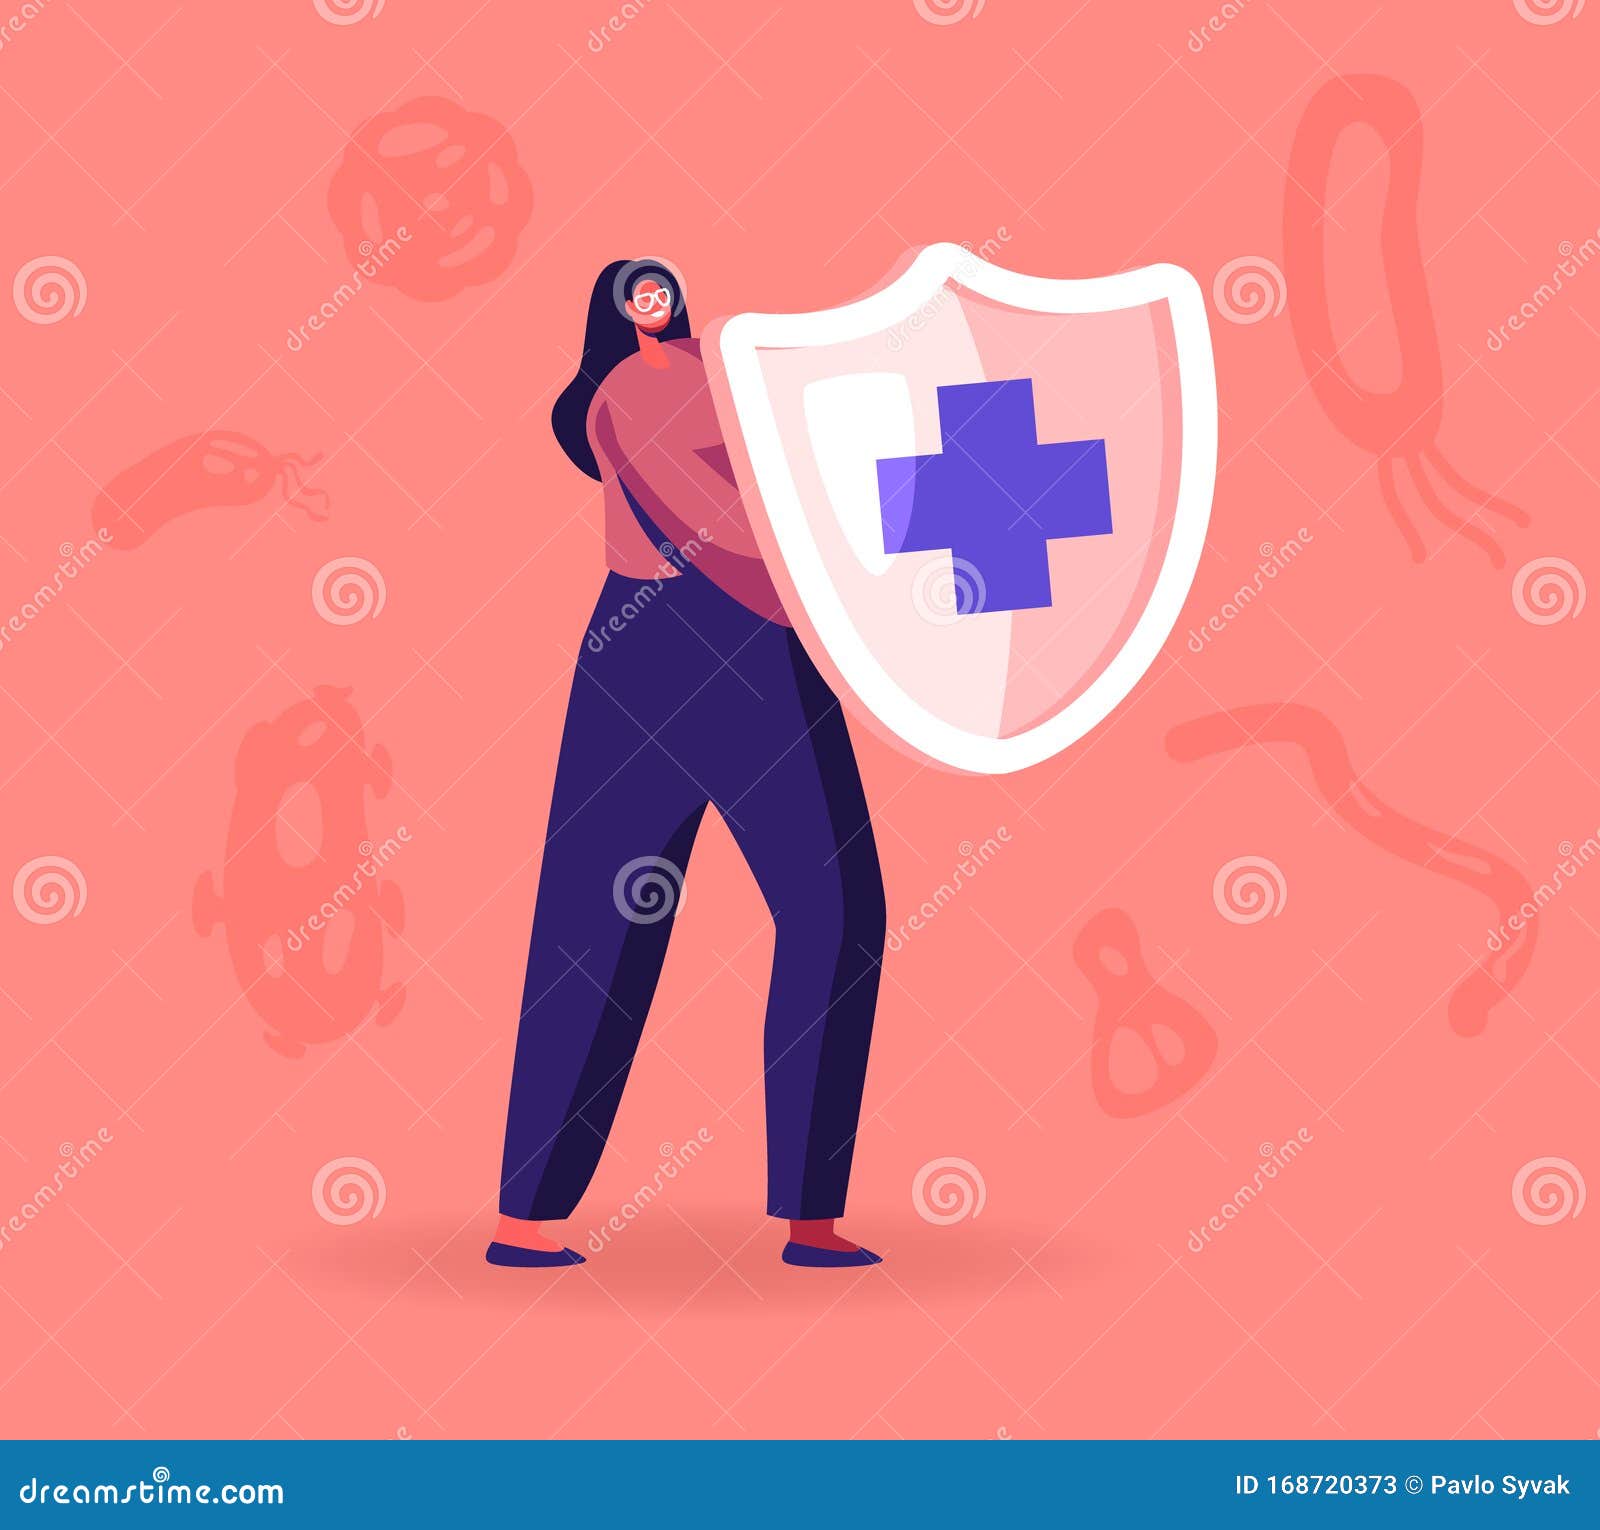 epidemiology concept. woman hold shield with cross sign. health danger risk spread. sanitary condition prevention